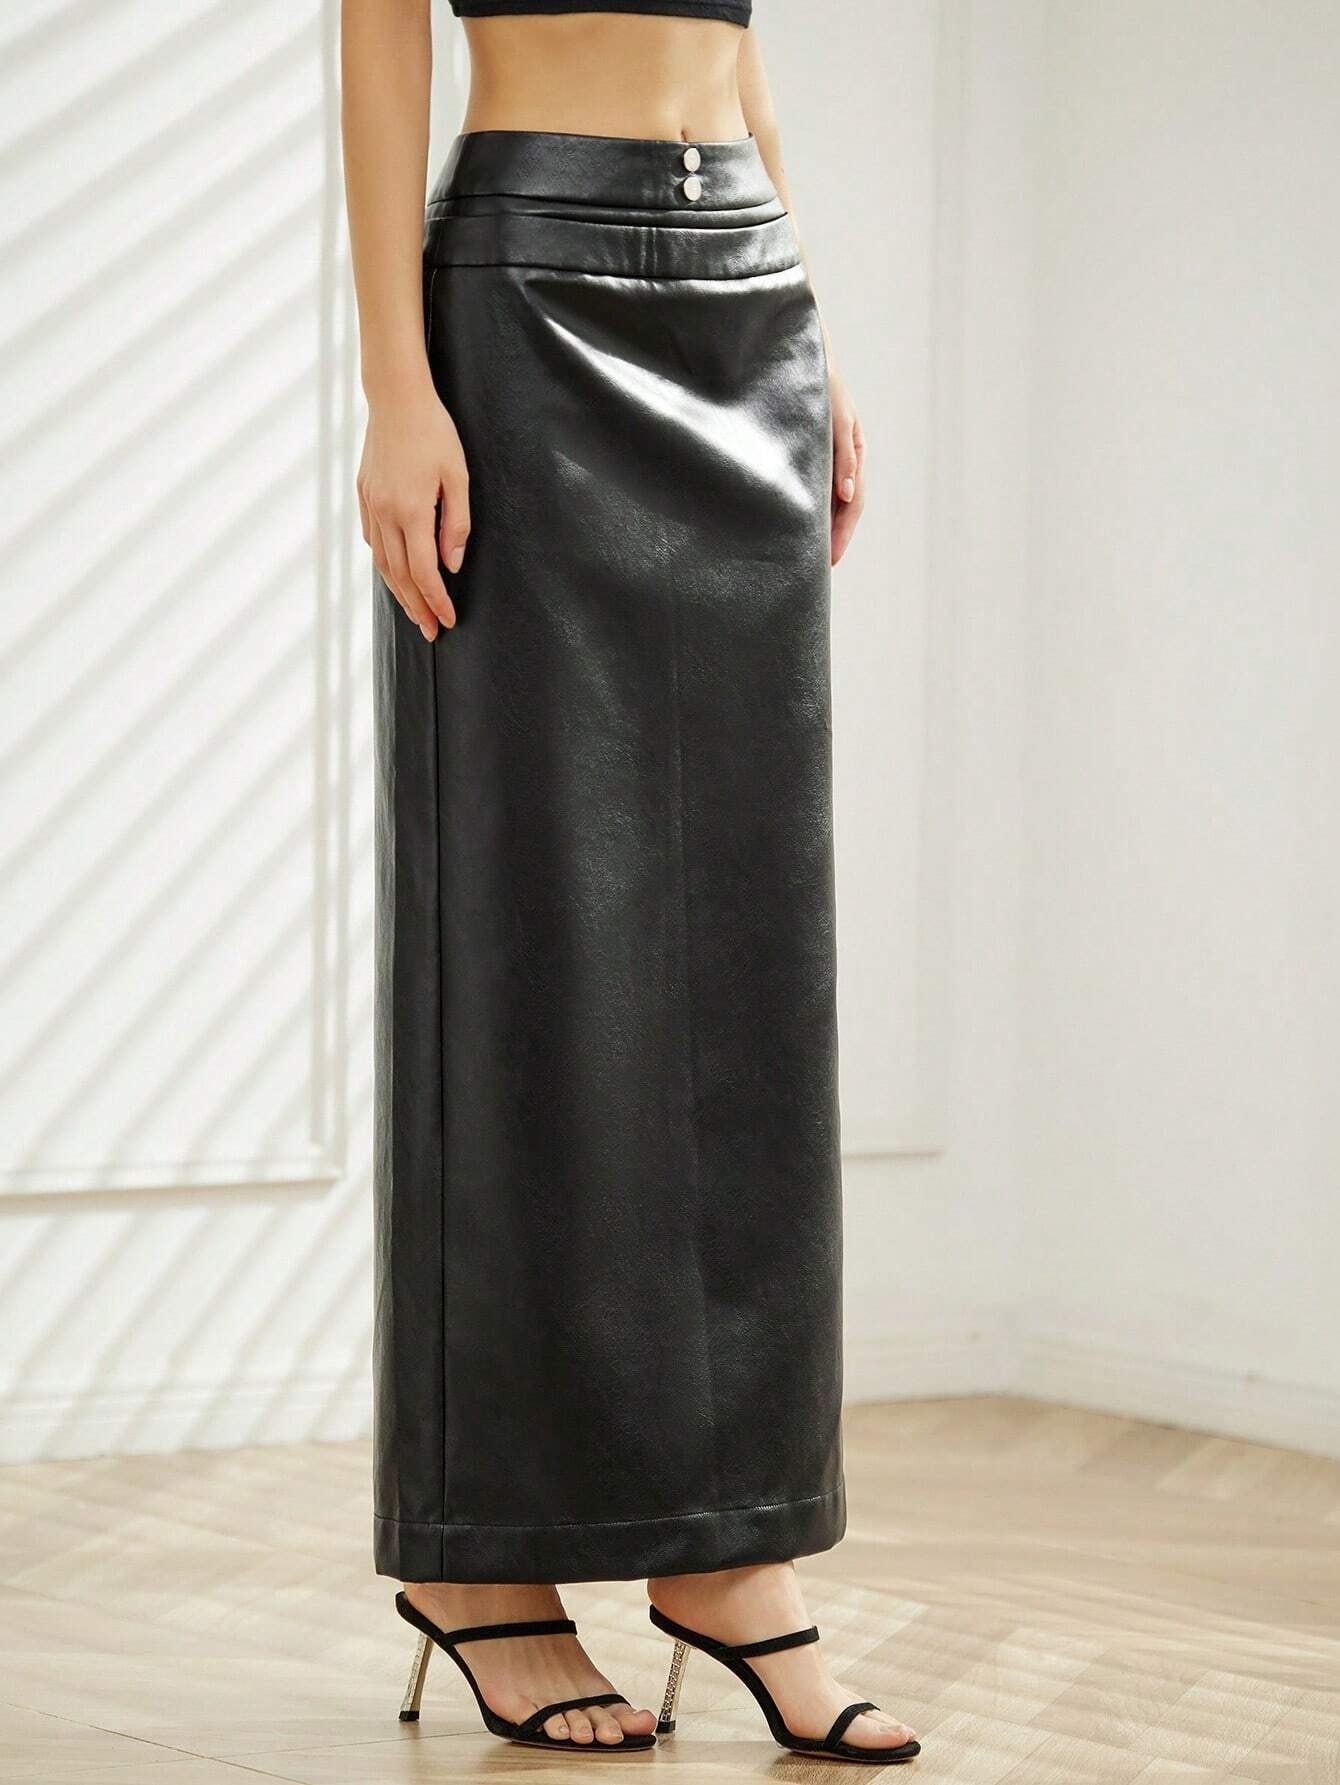 CM-BS351464 Women Casual Seoul Style PU Leather Straight Skirt - Black